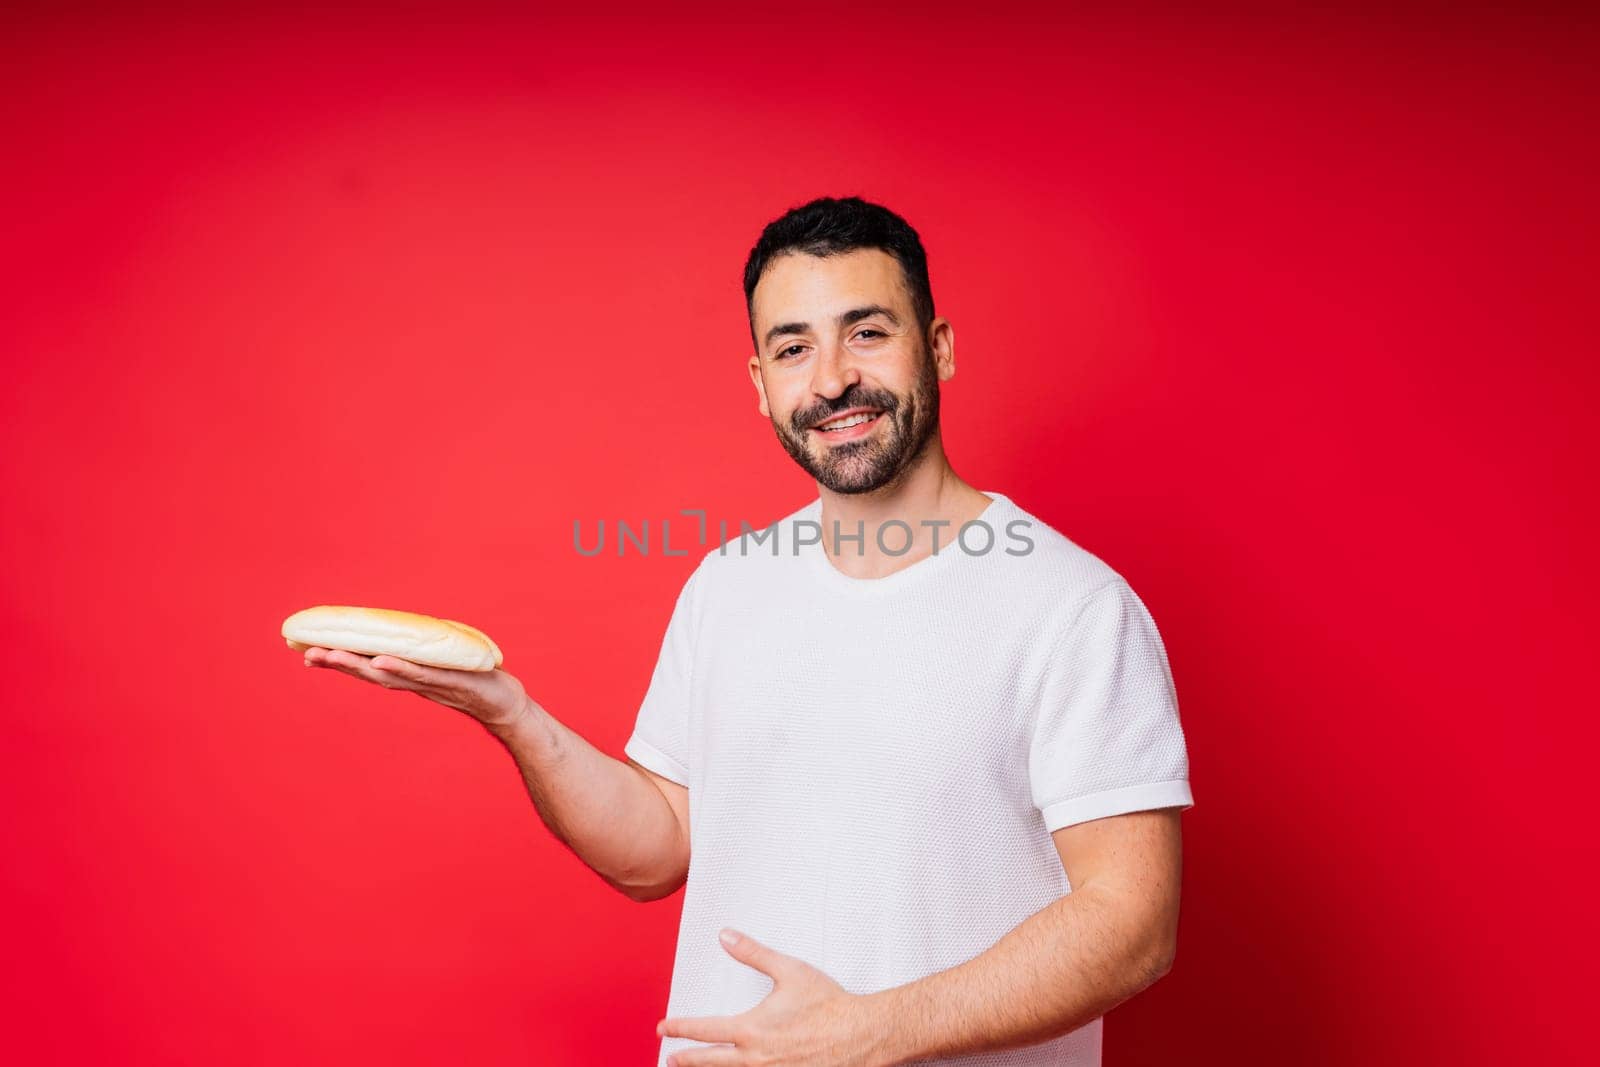 Man with freshly baked bread in hands isolated on red background studio